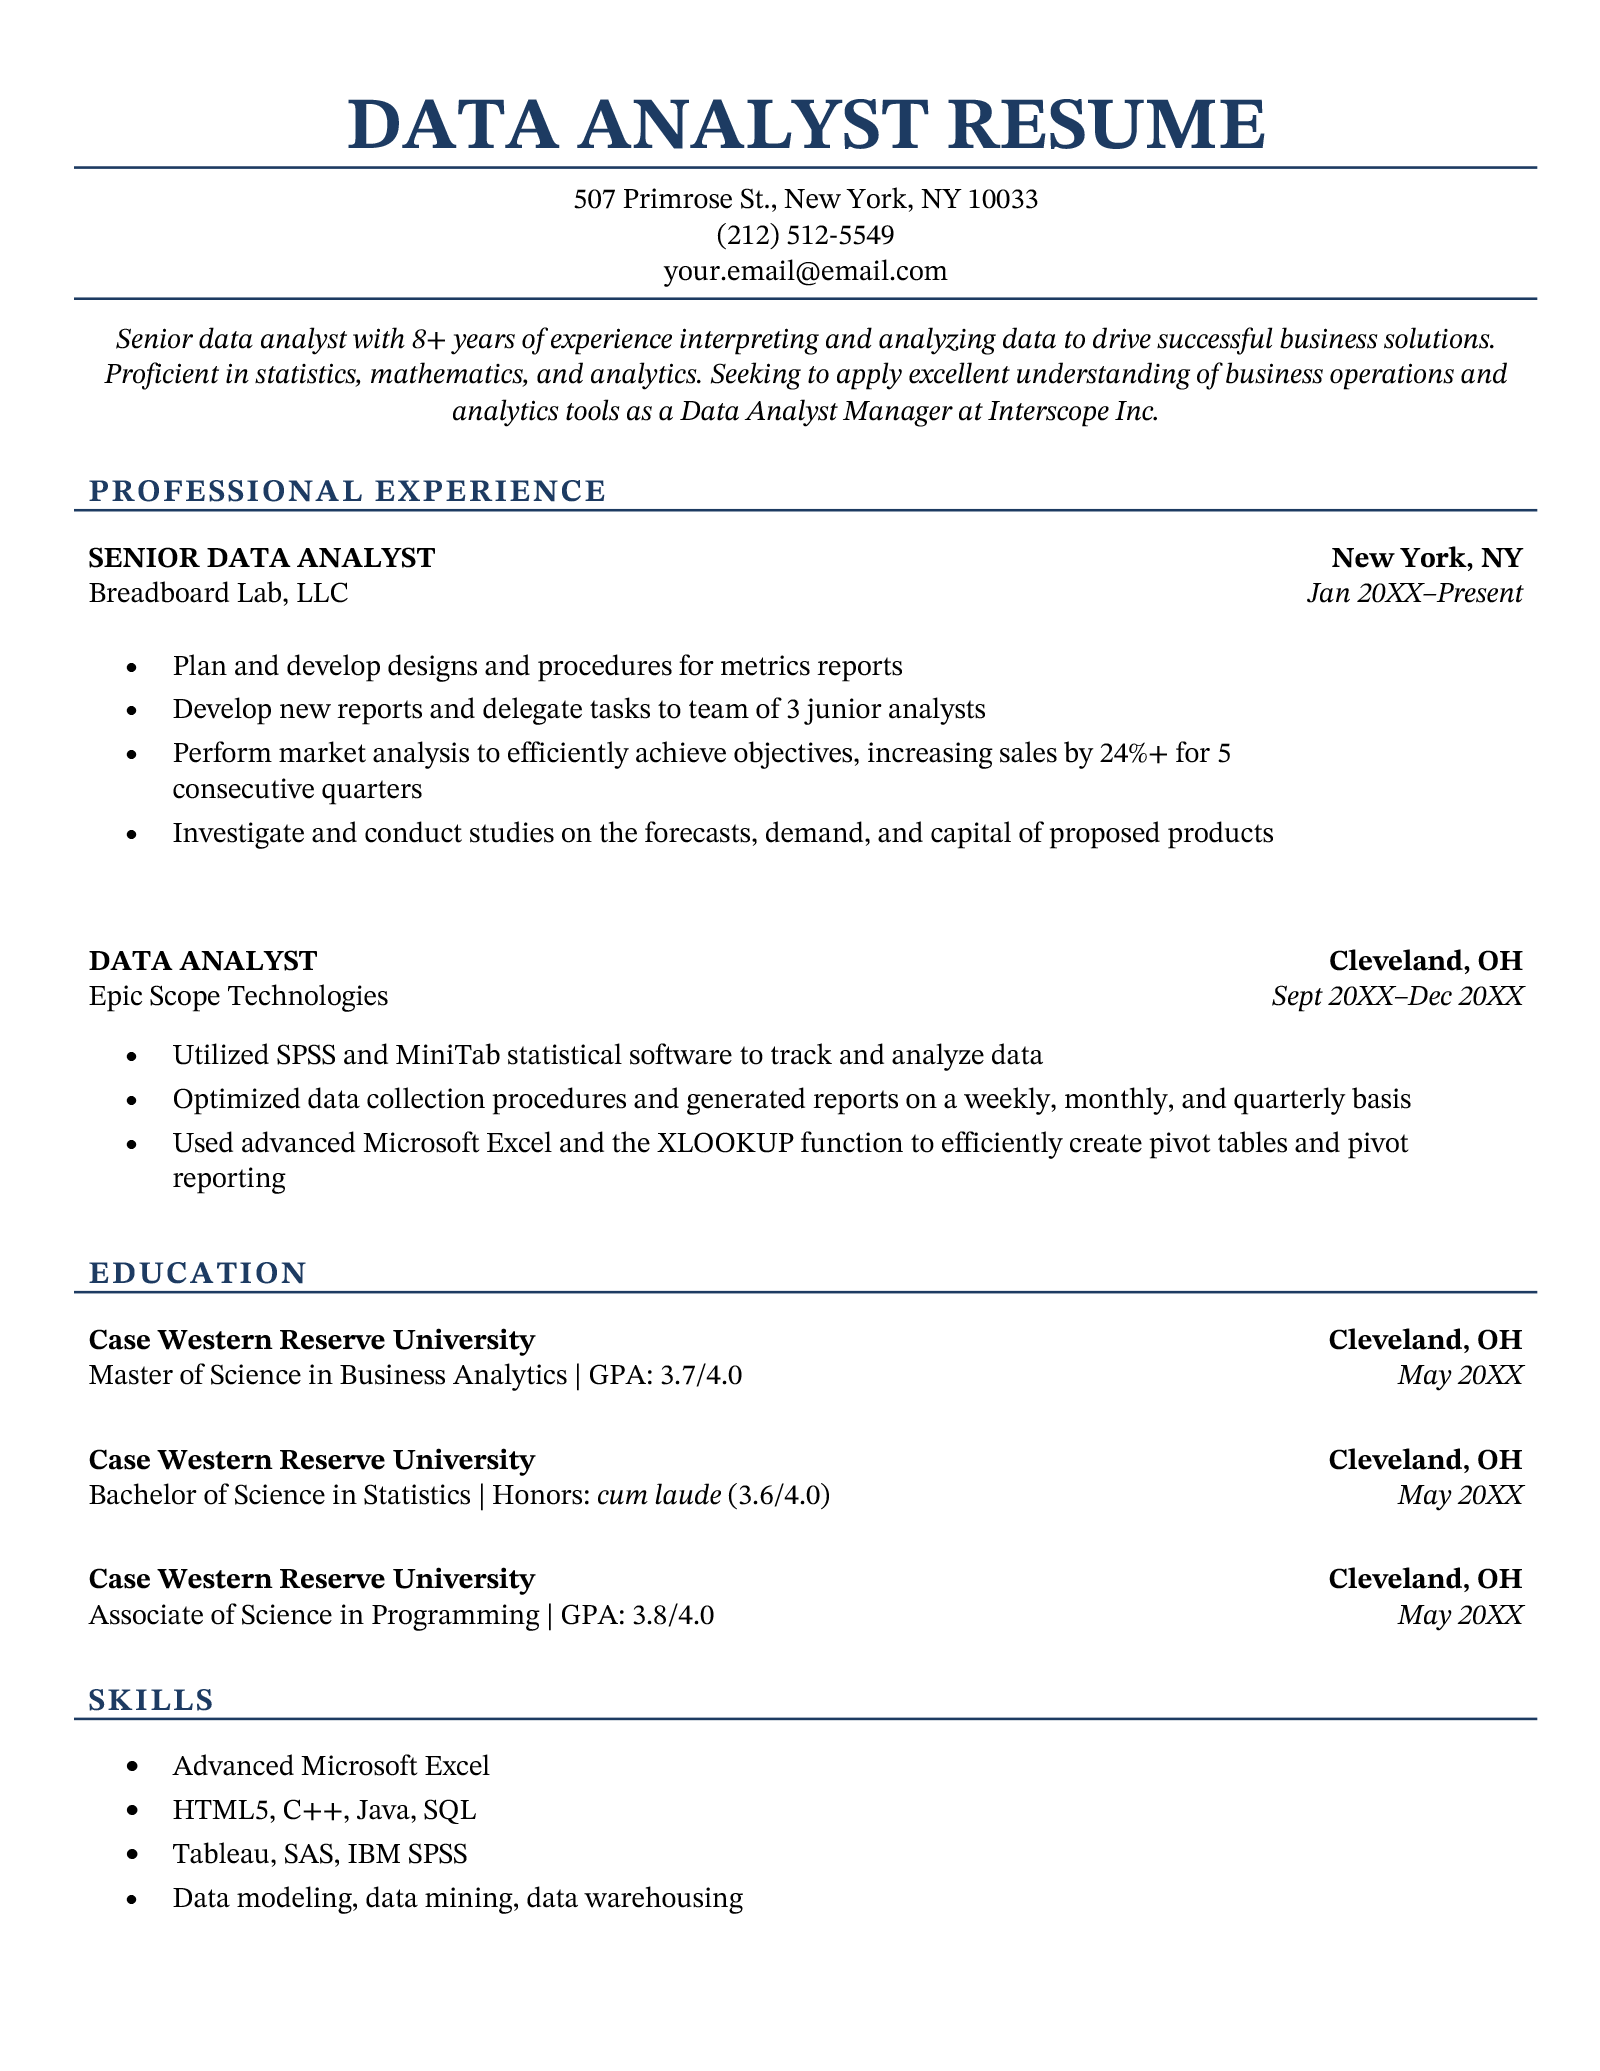 A data analyst resume example with a blue header and blue resume sections